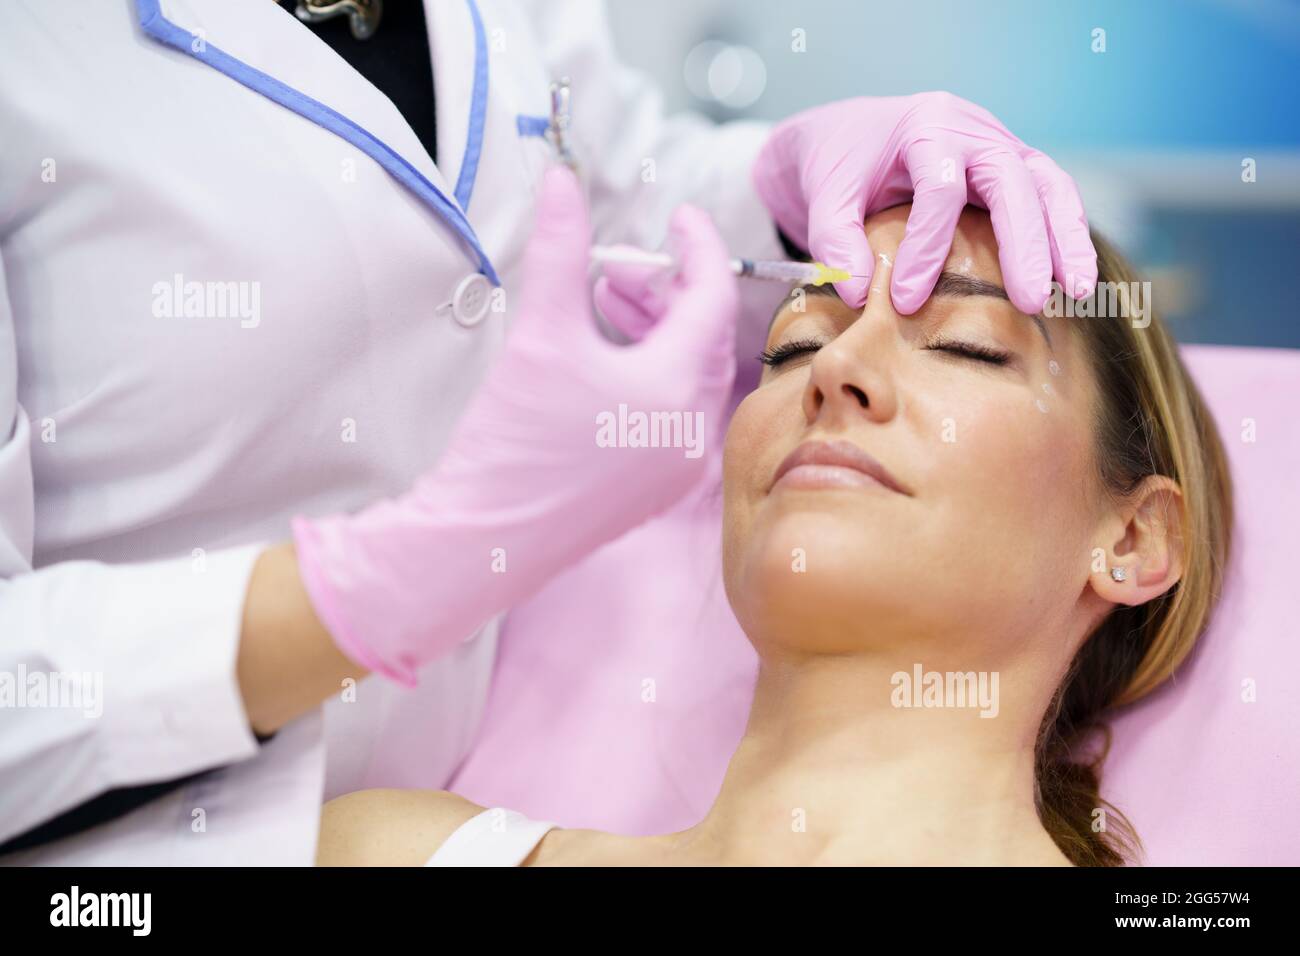 Aesthetic doctor injecting botulinum toxin into the forehead of her middle-aged patient. Stock Photo